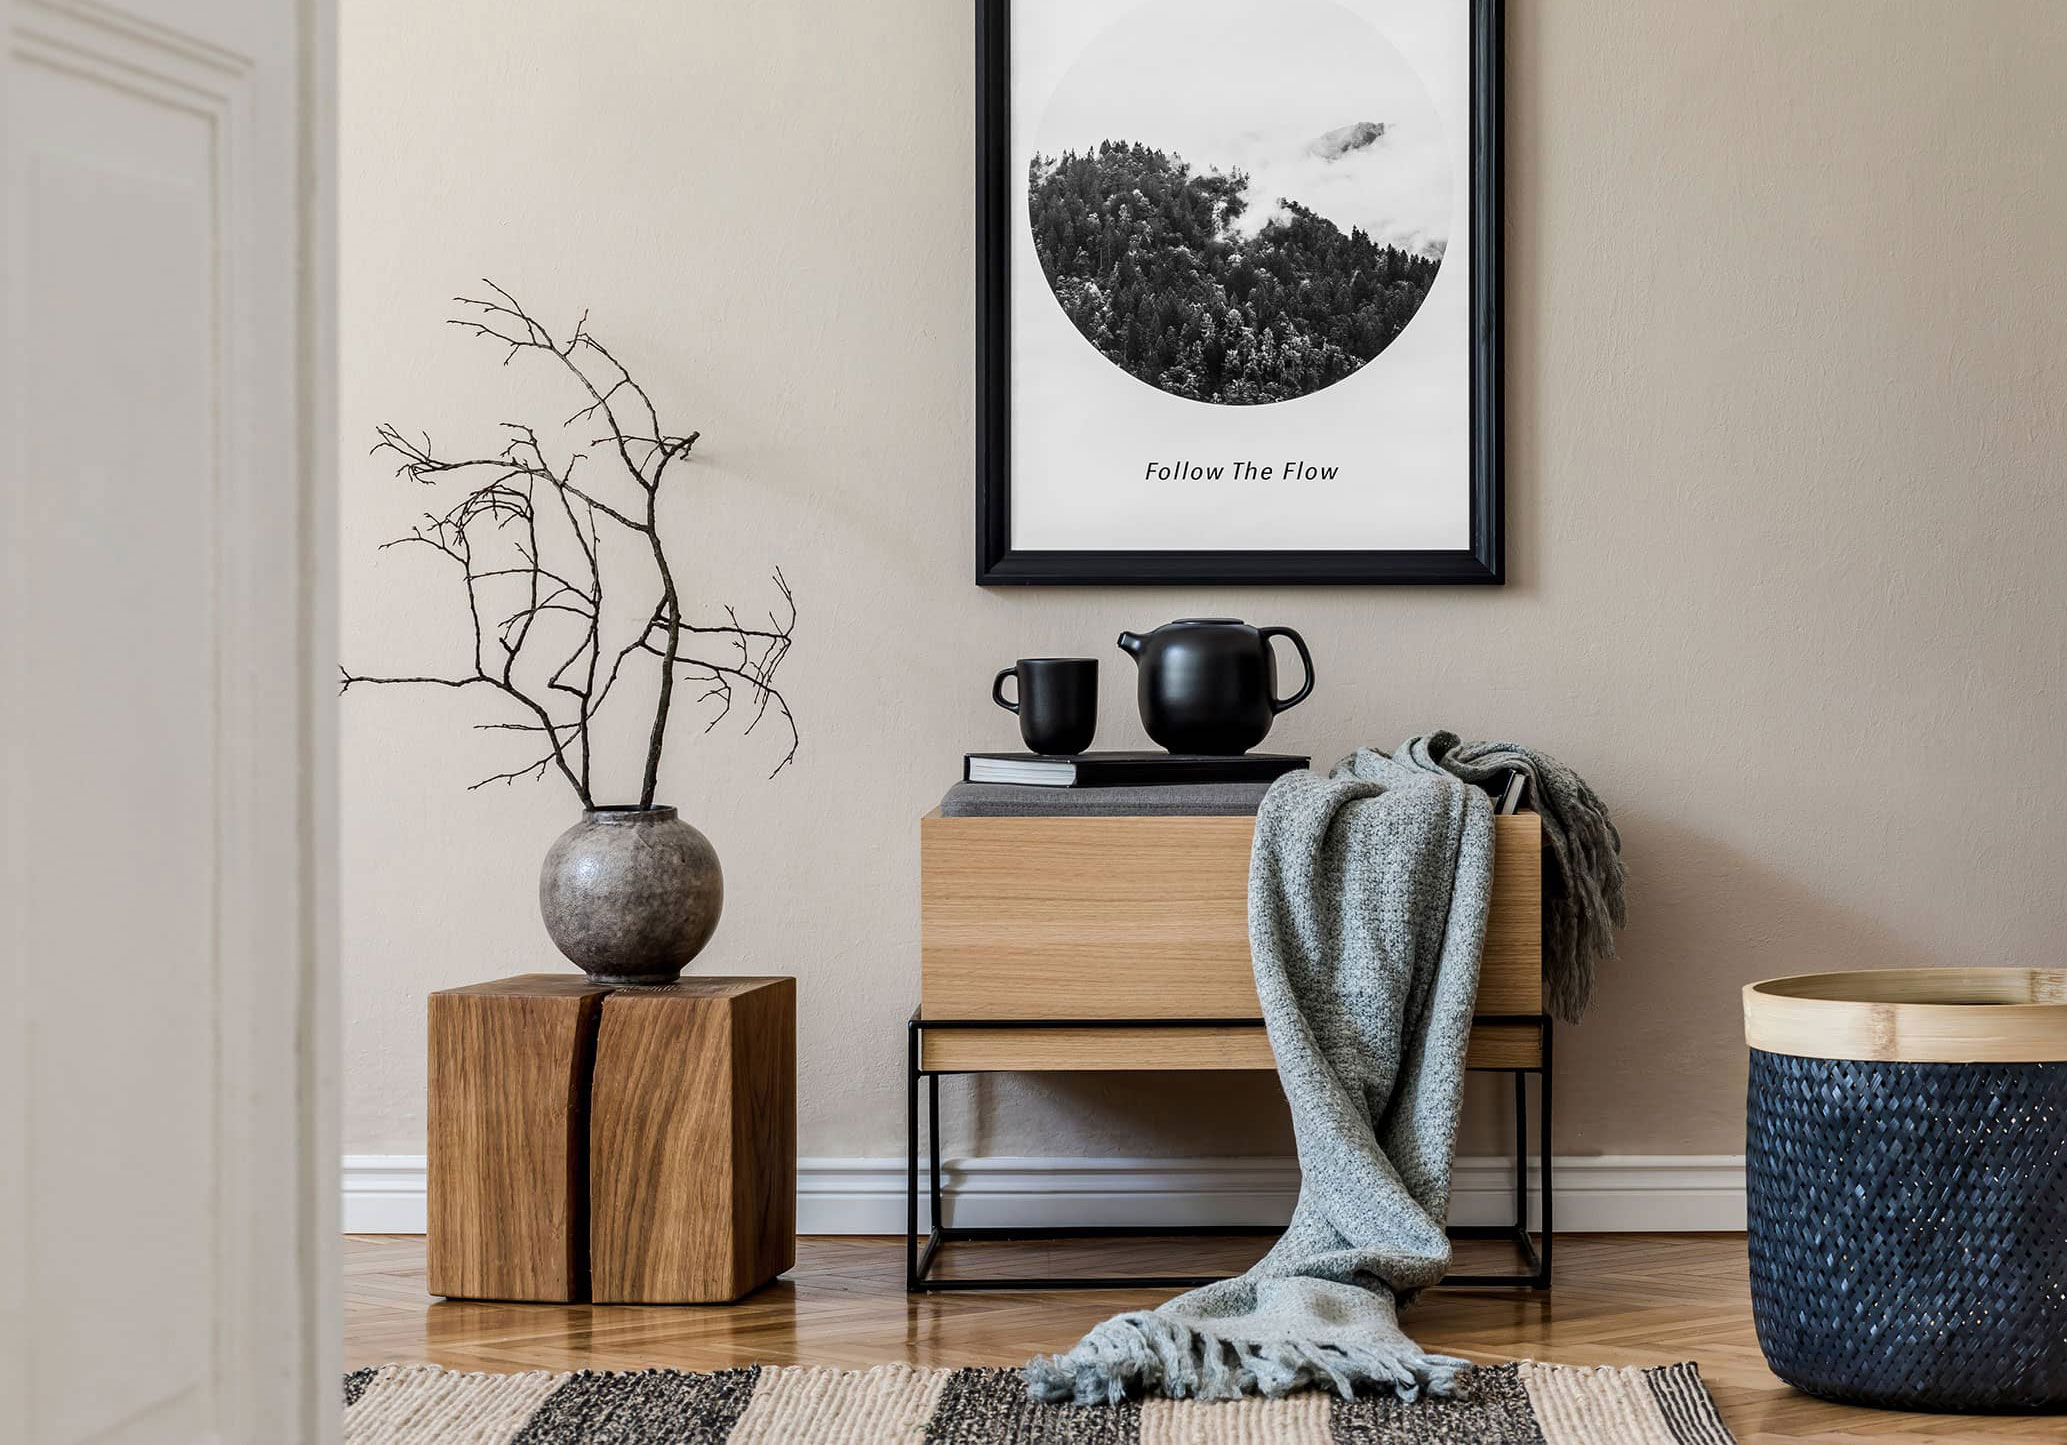 Architecturally pleasing home decor against a wall in a home including a small table with a soft blanket draping off the side, a frail plant with no leaves and a warm painting that says "Follow The Flow"